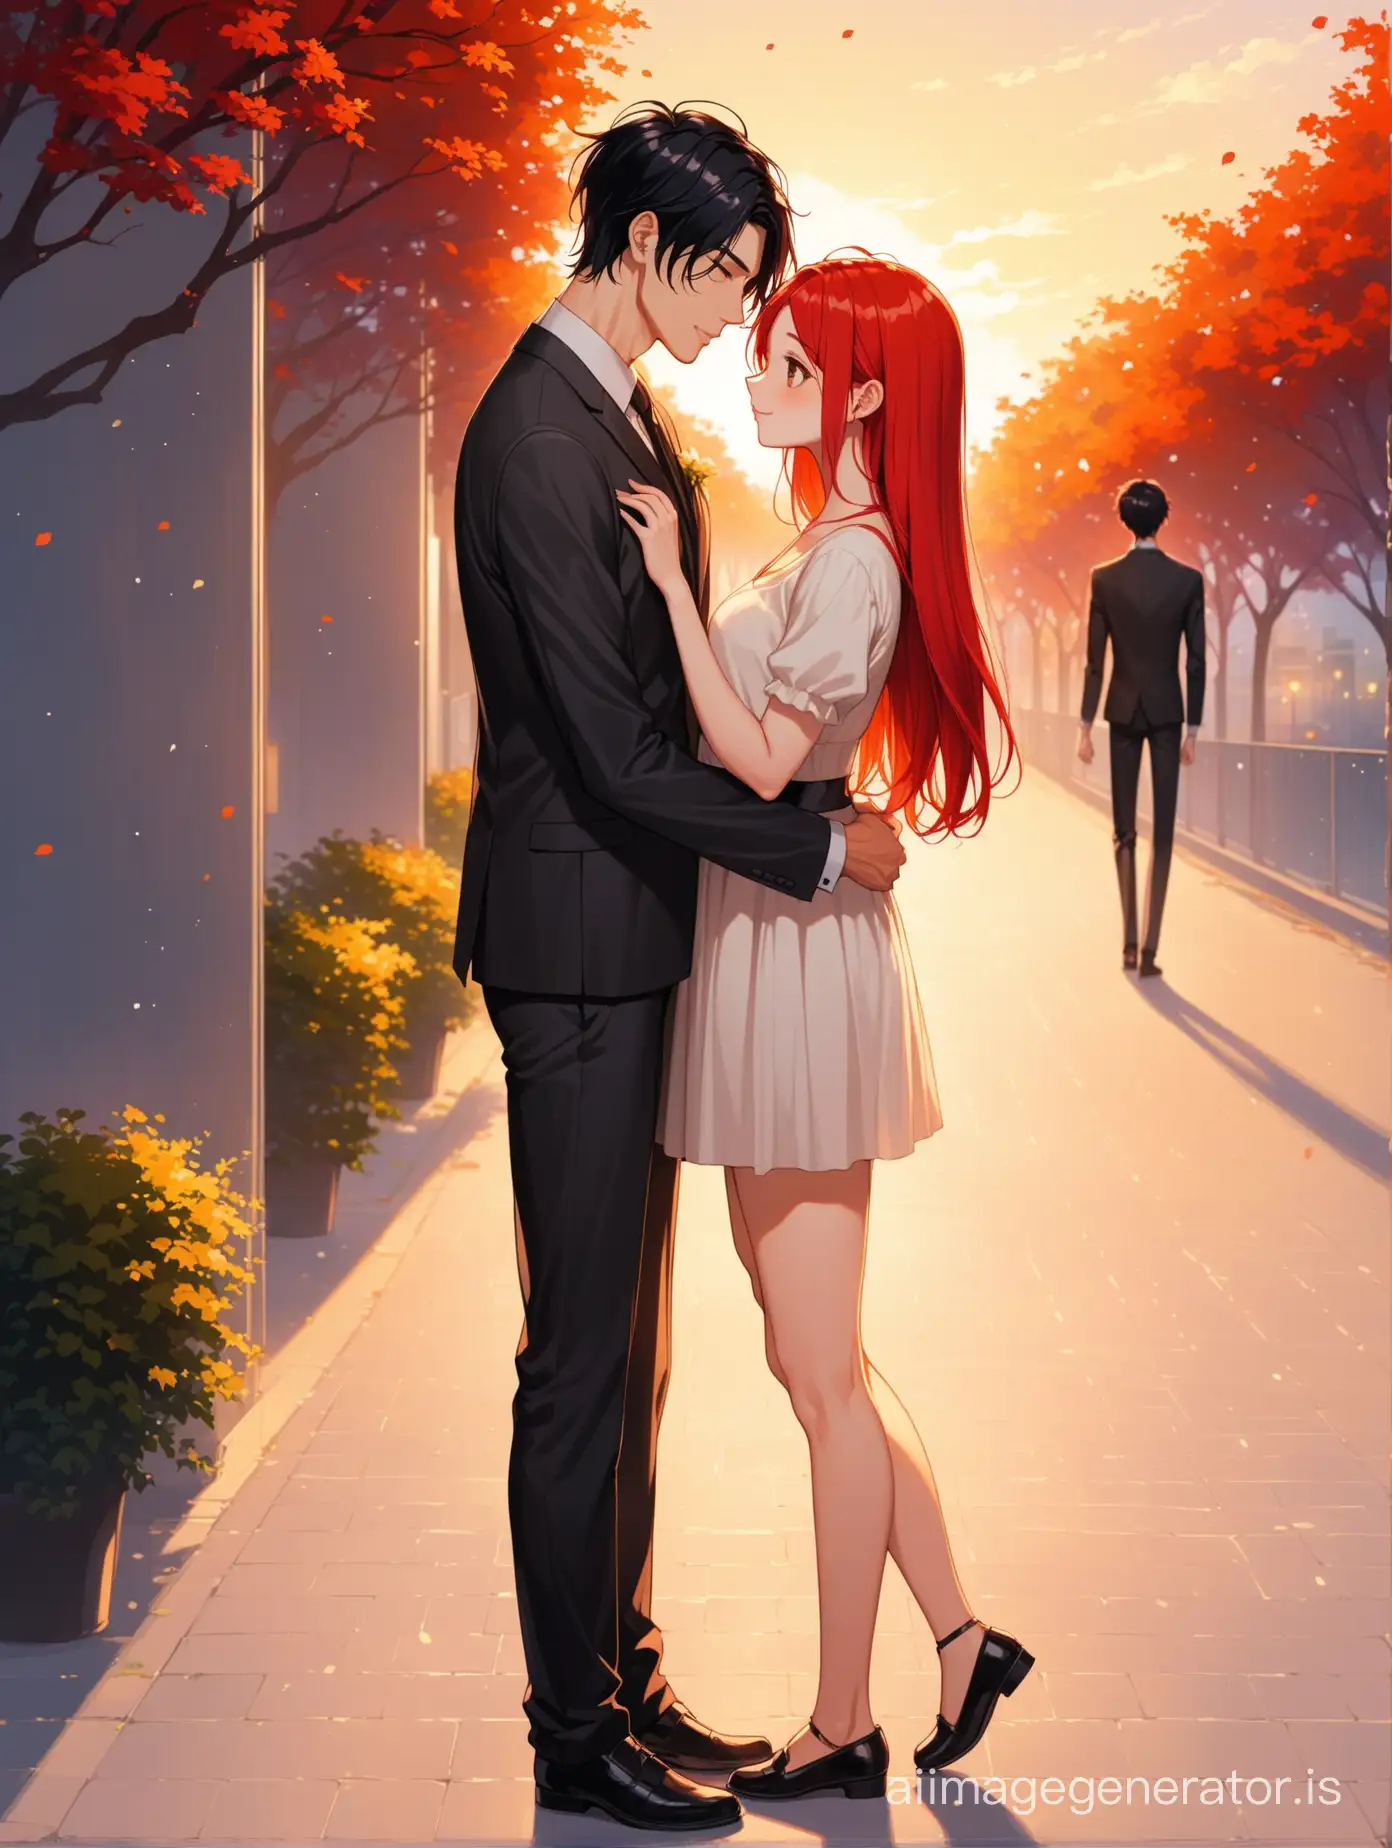 Affectionate-Couple-Short-RedHaired-Woman-with-Tall-Slender-Man